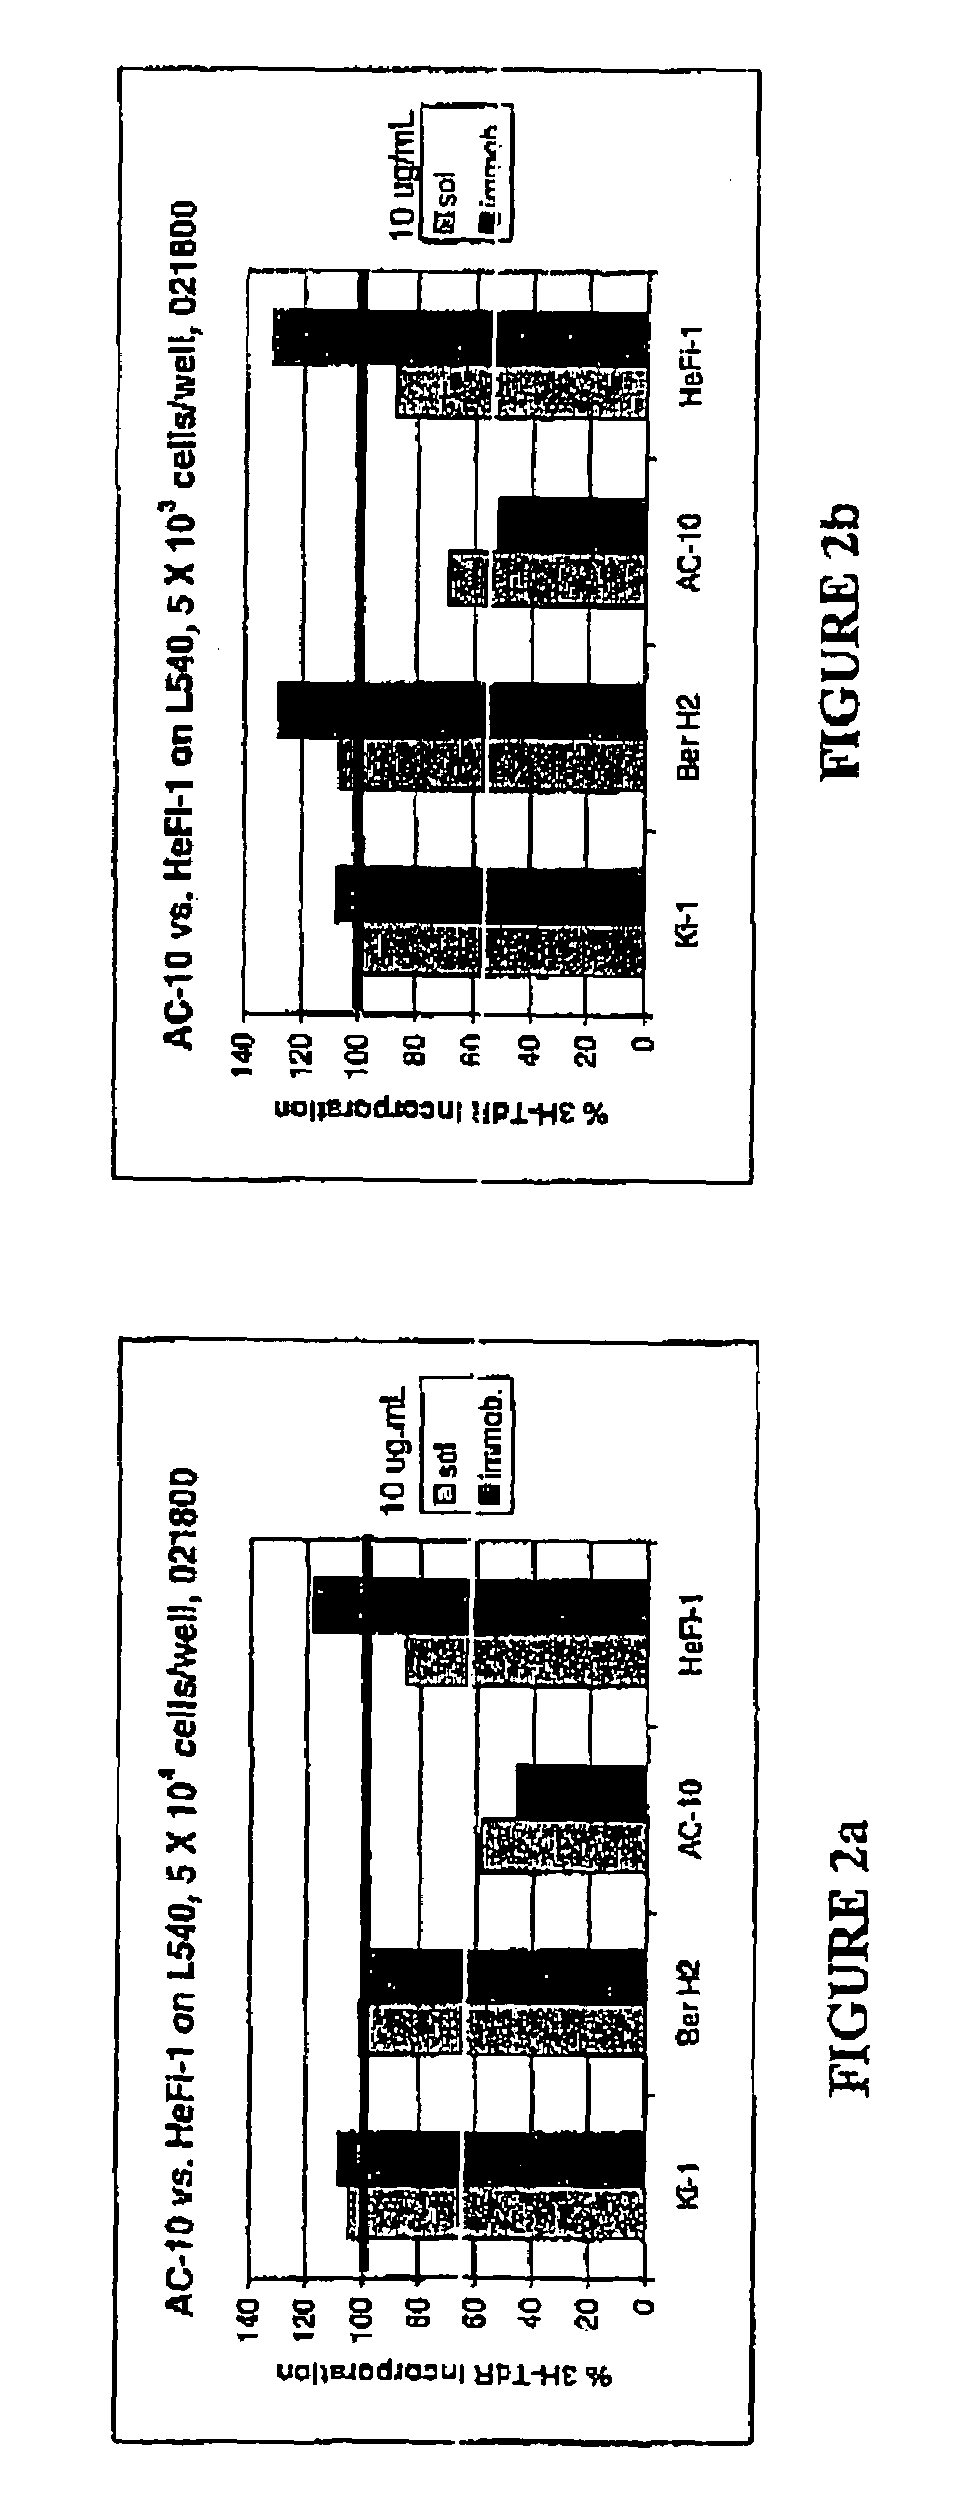 Recombinant anti-CD30 antibodies and uses thereof